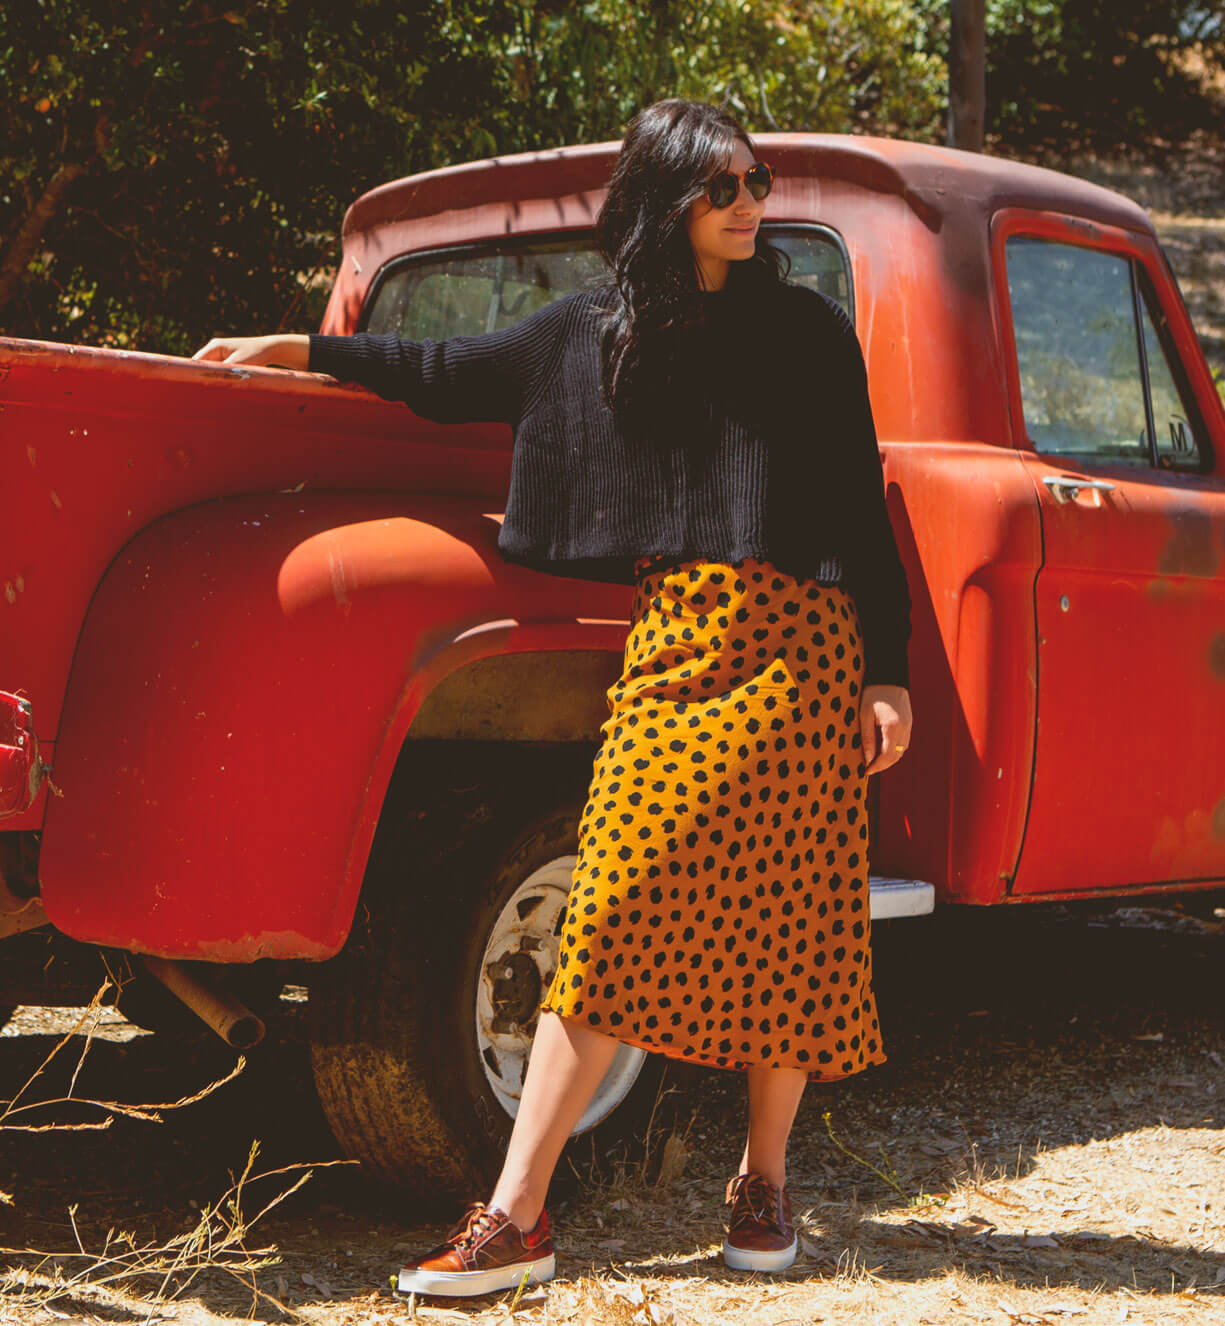 A woman leaning against a Bed Stu Azeli truck in a polka dot skirt.